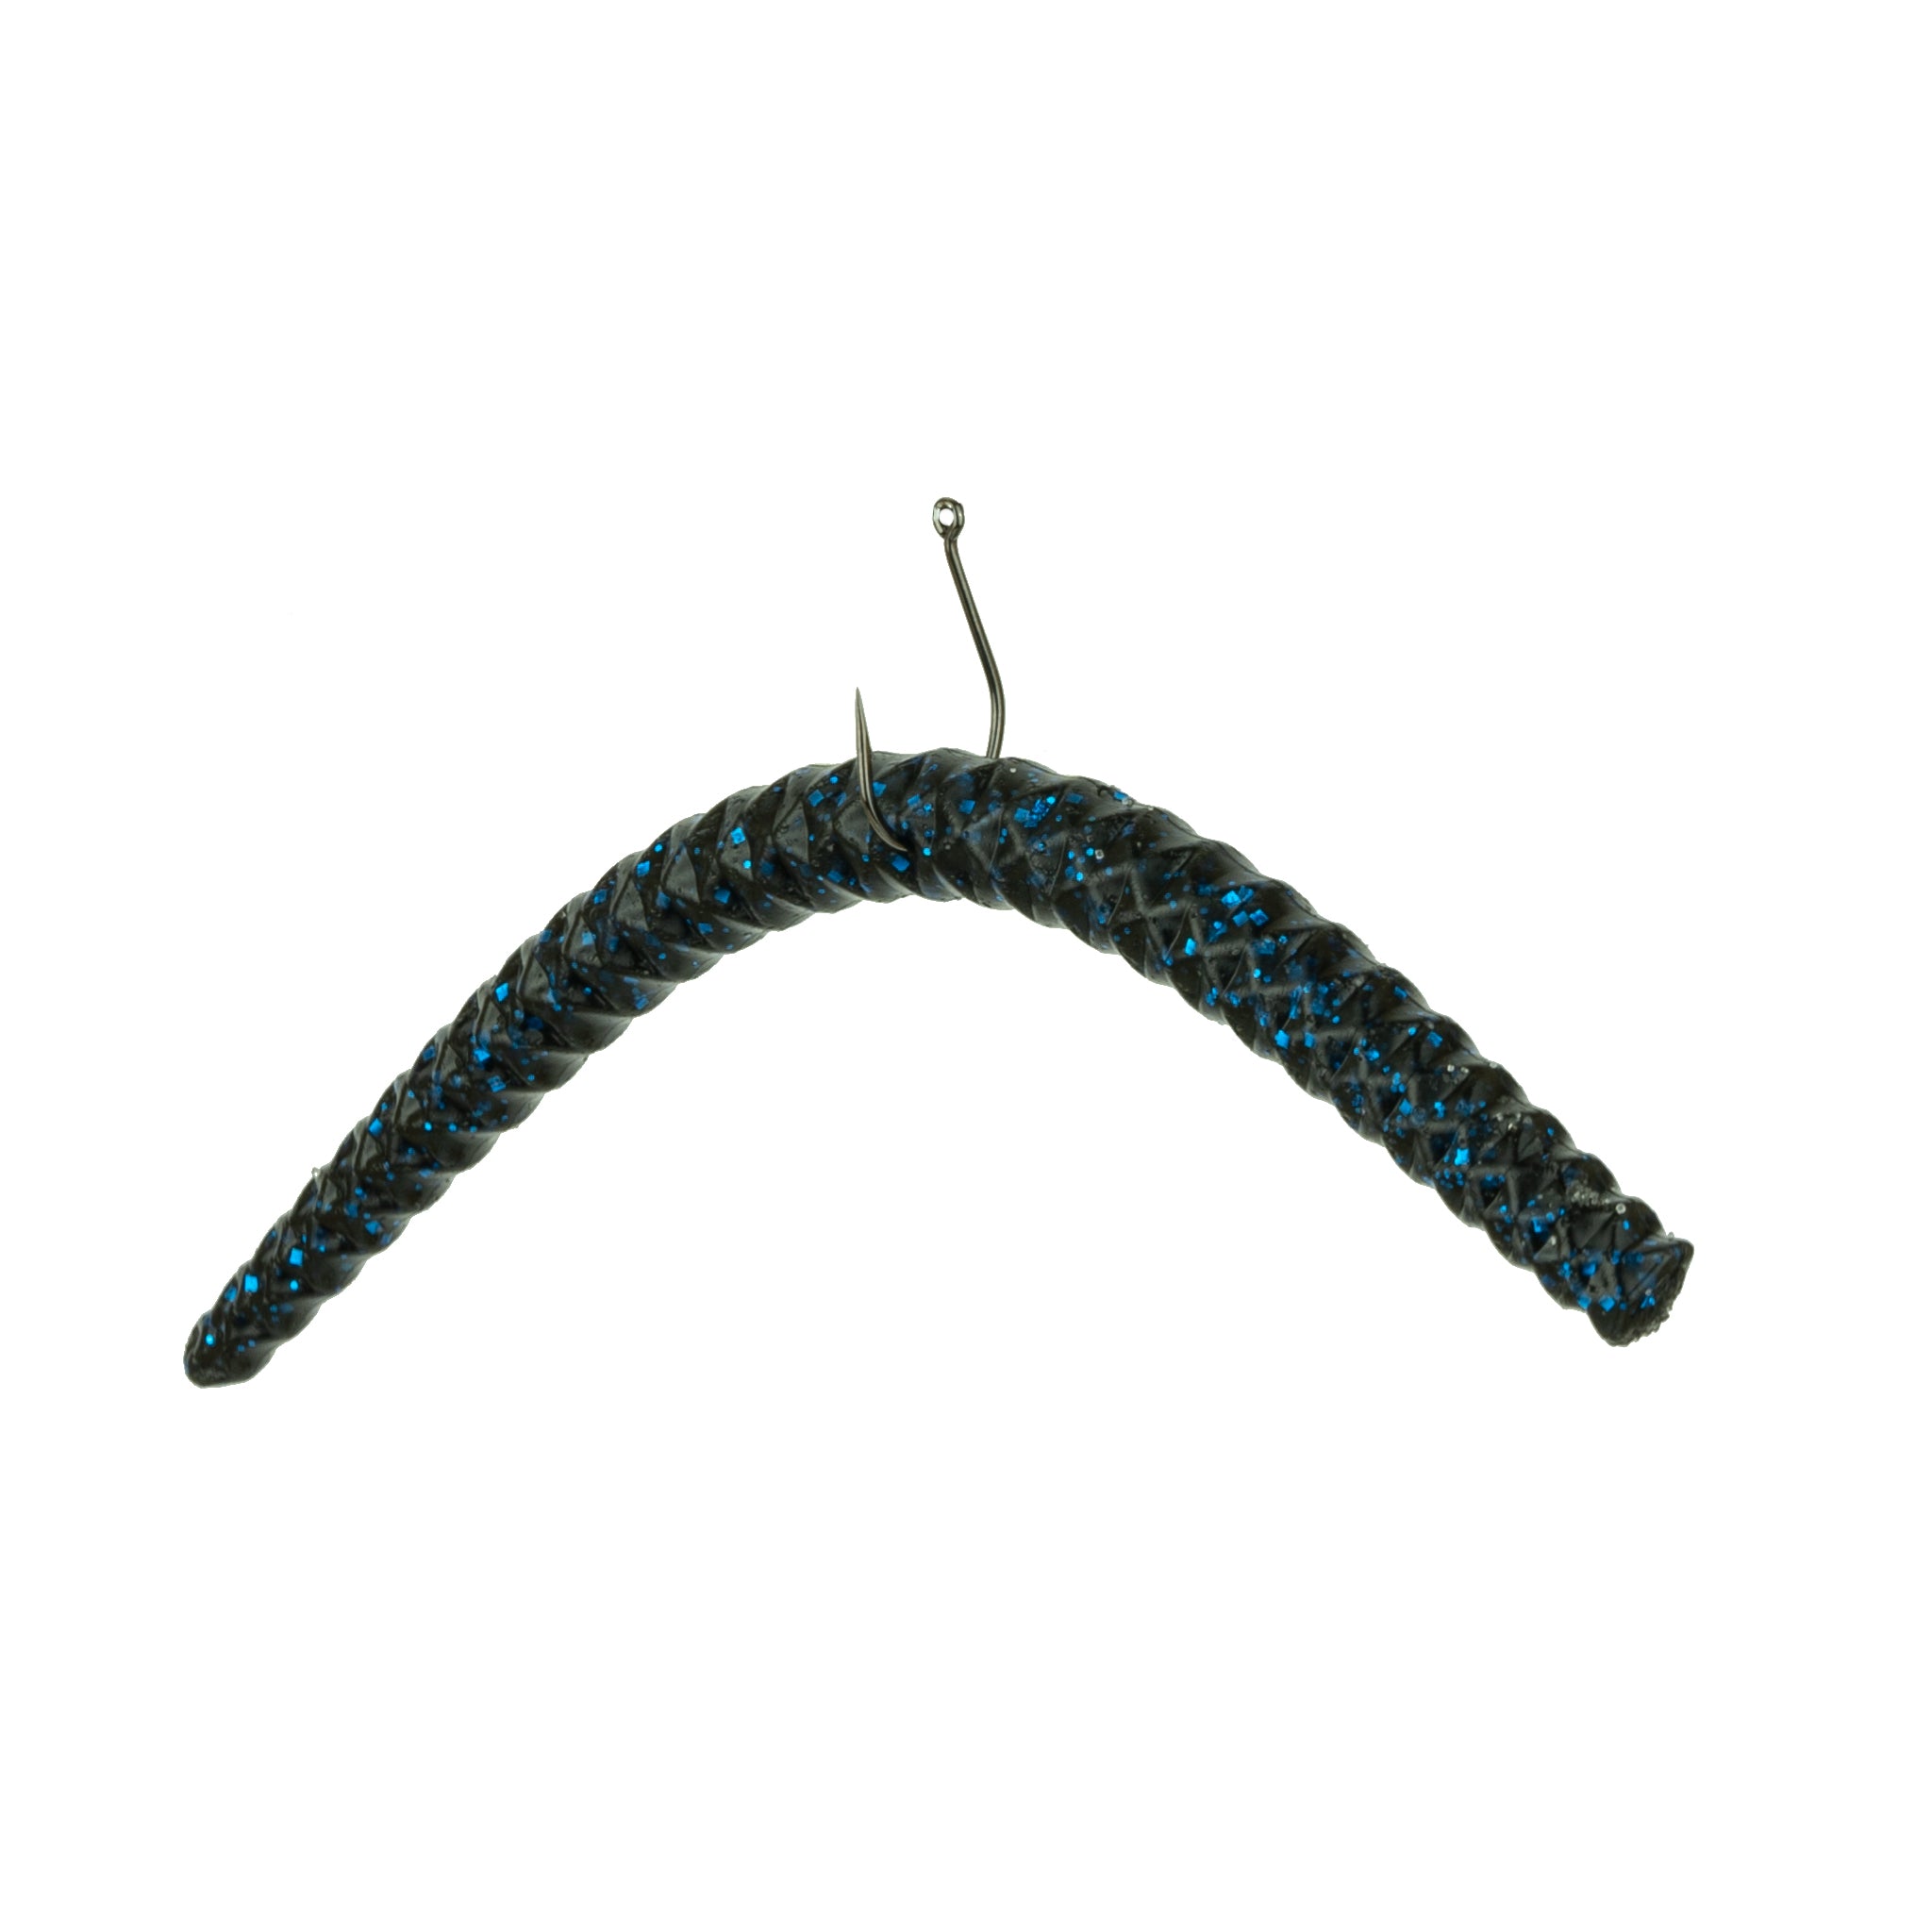 6th Sense Keel Weighted Hooks Now in Stock at Blue Water Gear